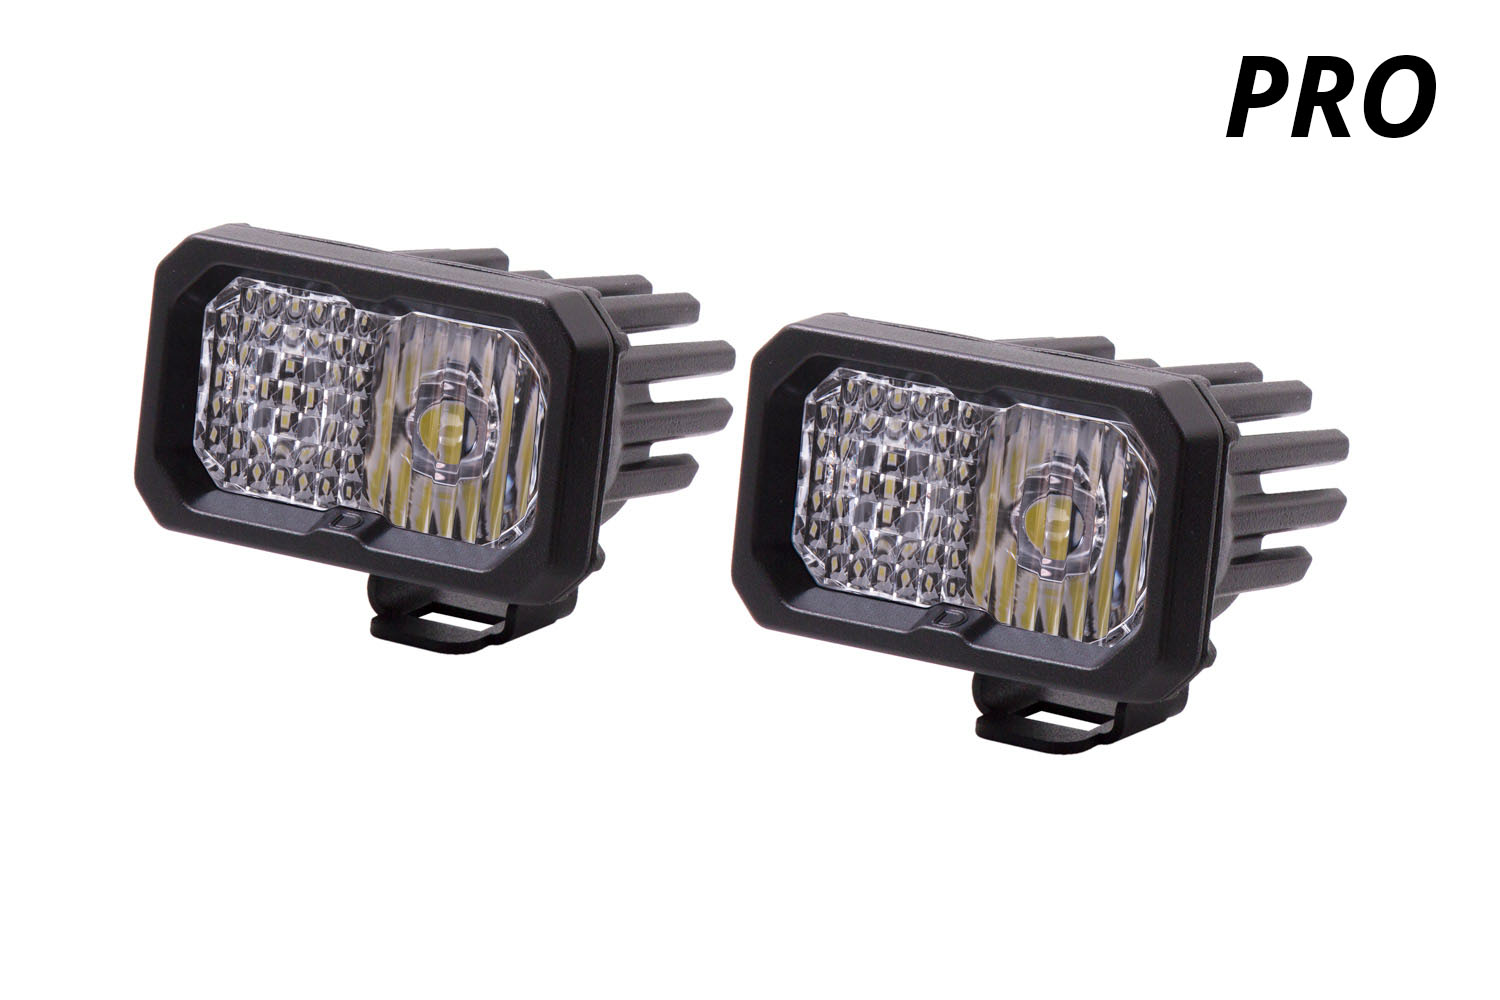 Diode Dynamics Stage Series 2 Inch LED Pod, Pro White Flood Standard RBL Pair